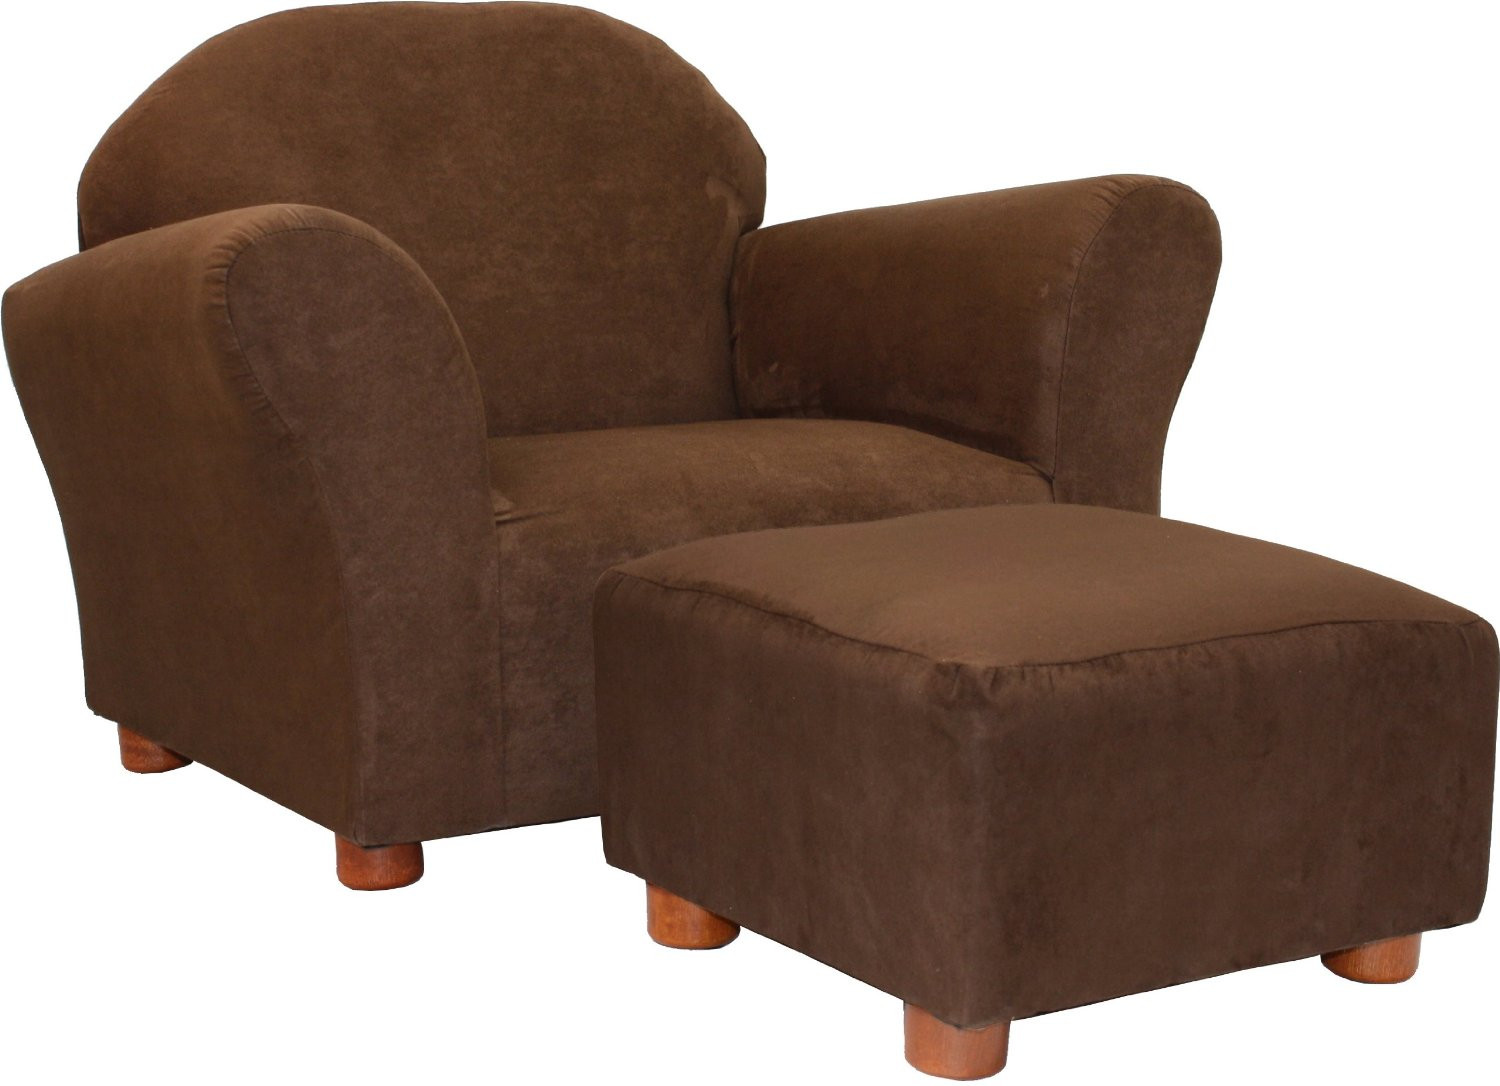 Kids Chair With Ottoman
 Kids & Toddler Chair and Ottoman Sets